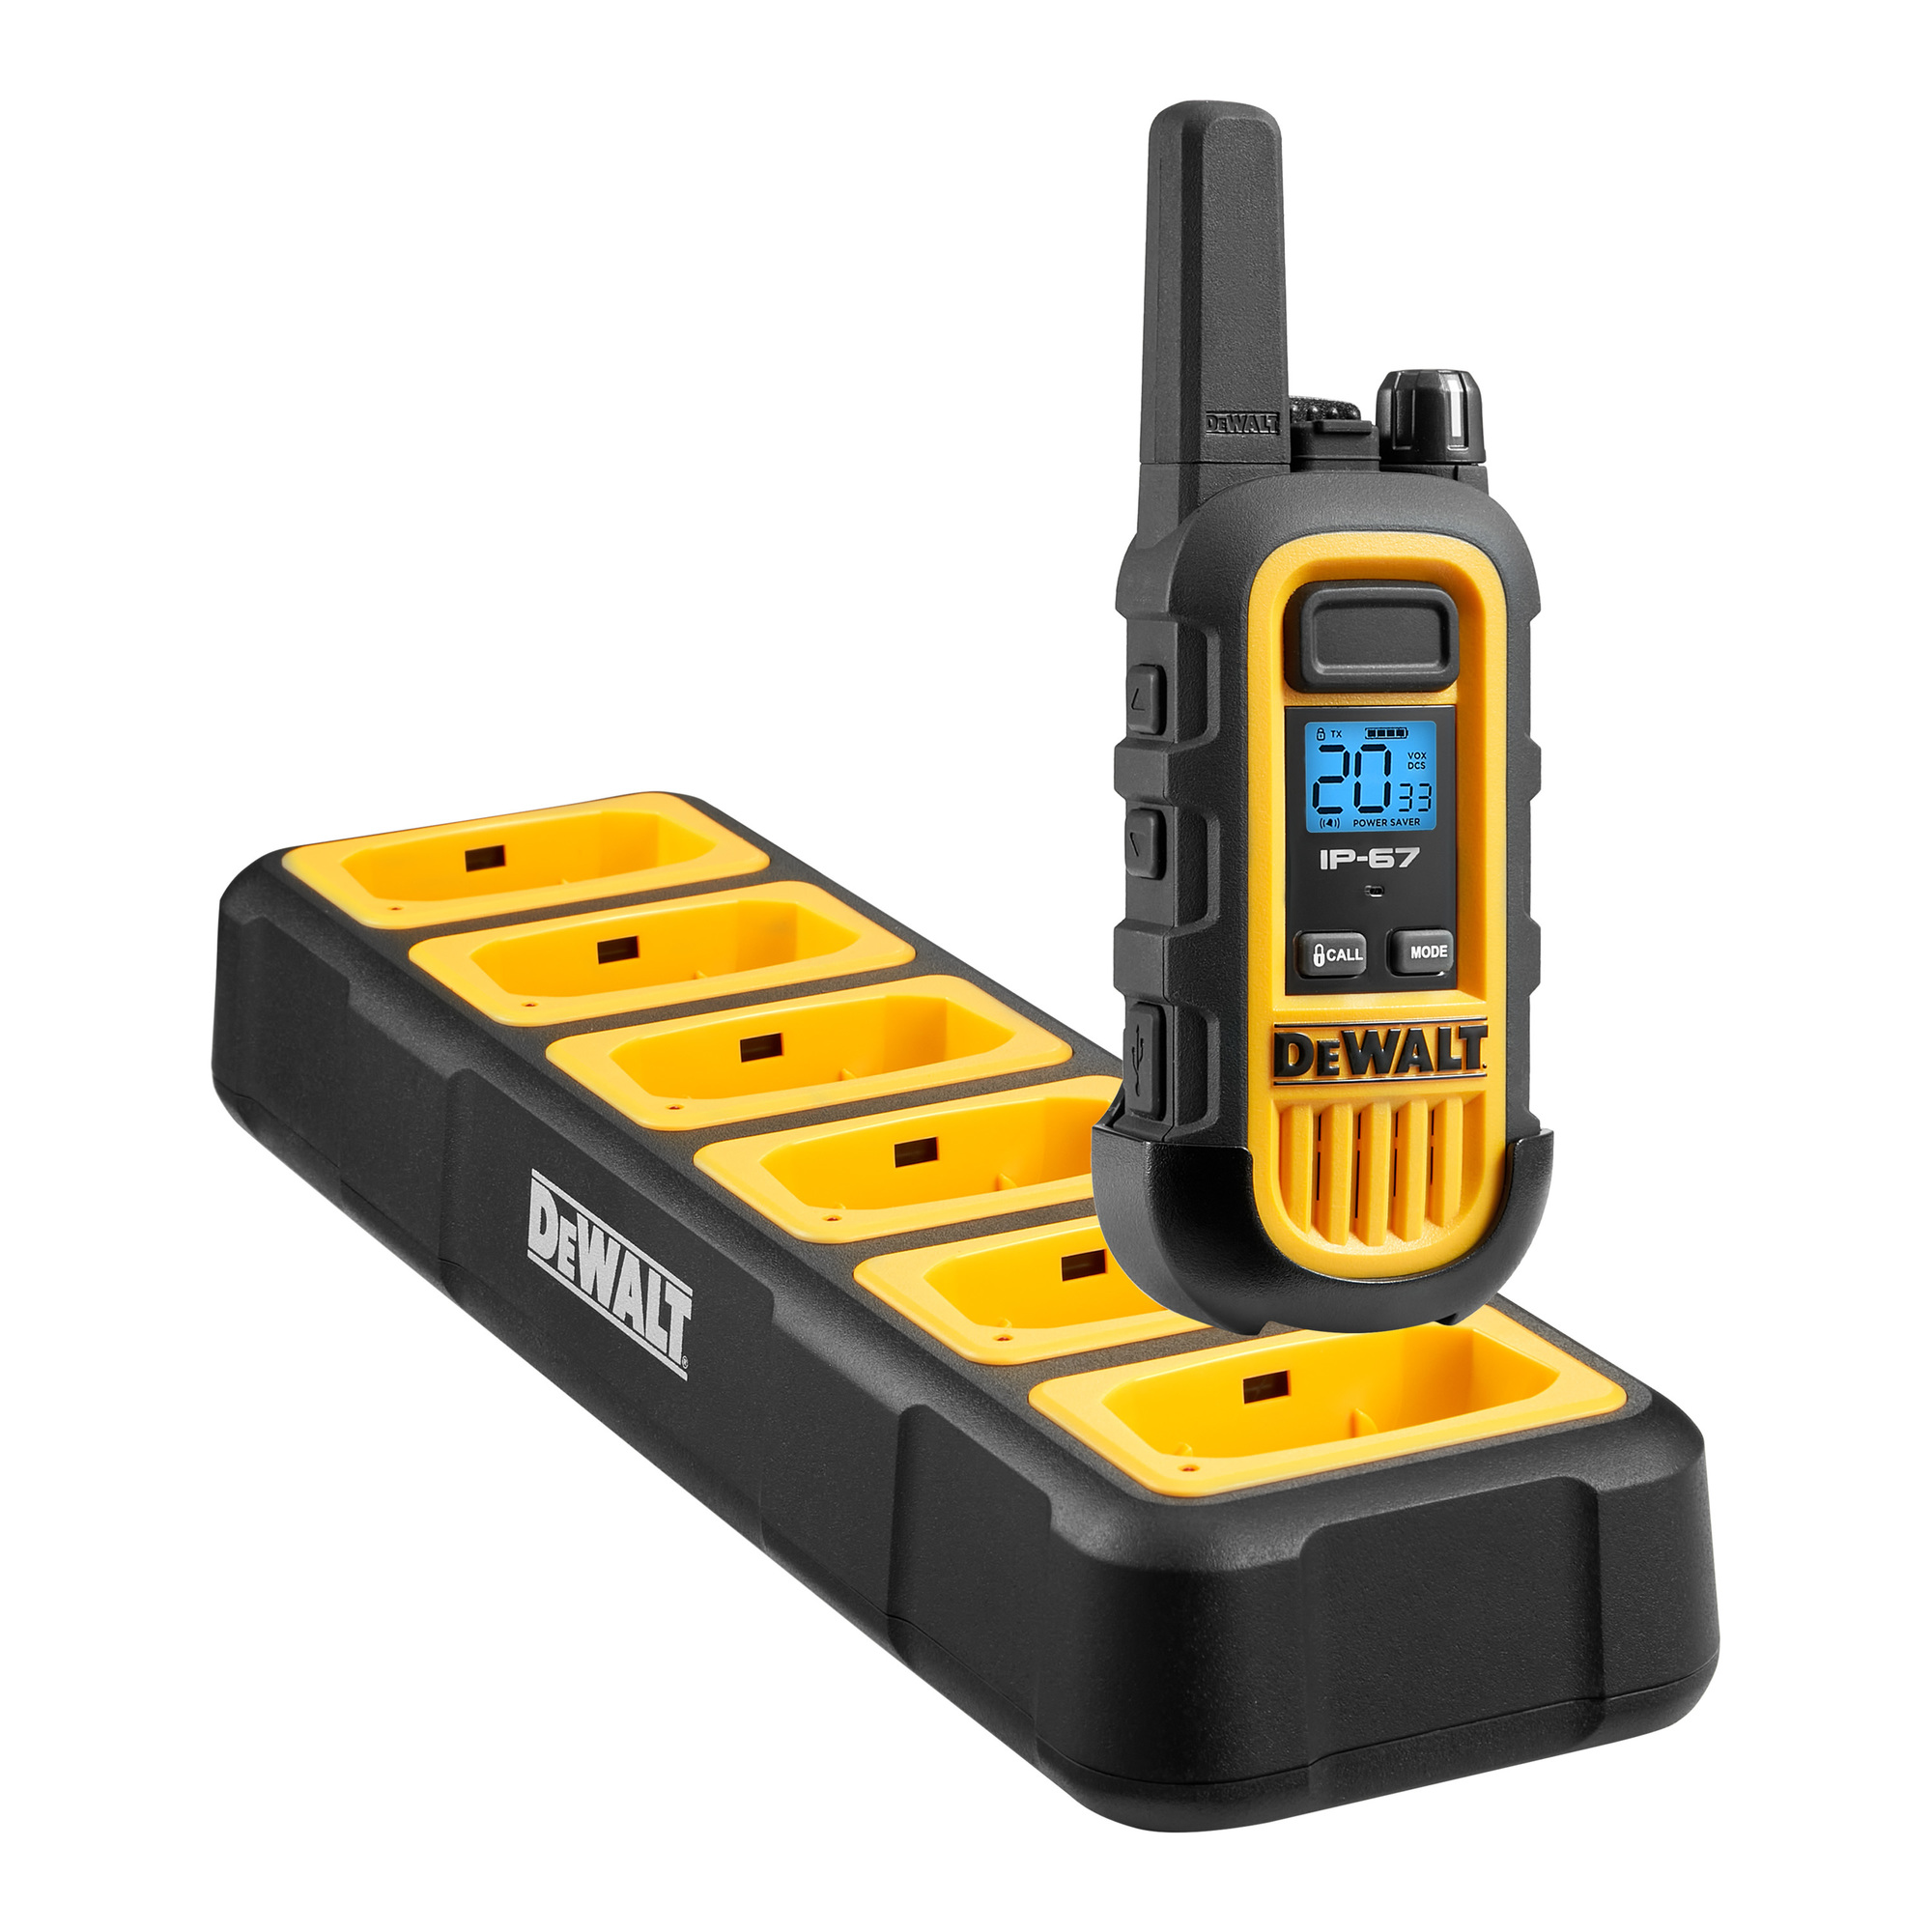 DEWALT Port Charger for Two-Way Radio DXFRS300, Model# DXFRSCH6-300B  Northern Tool